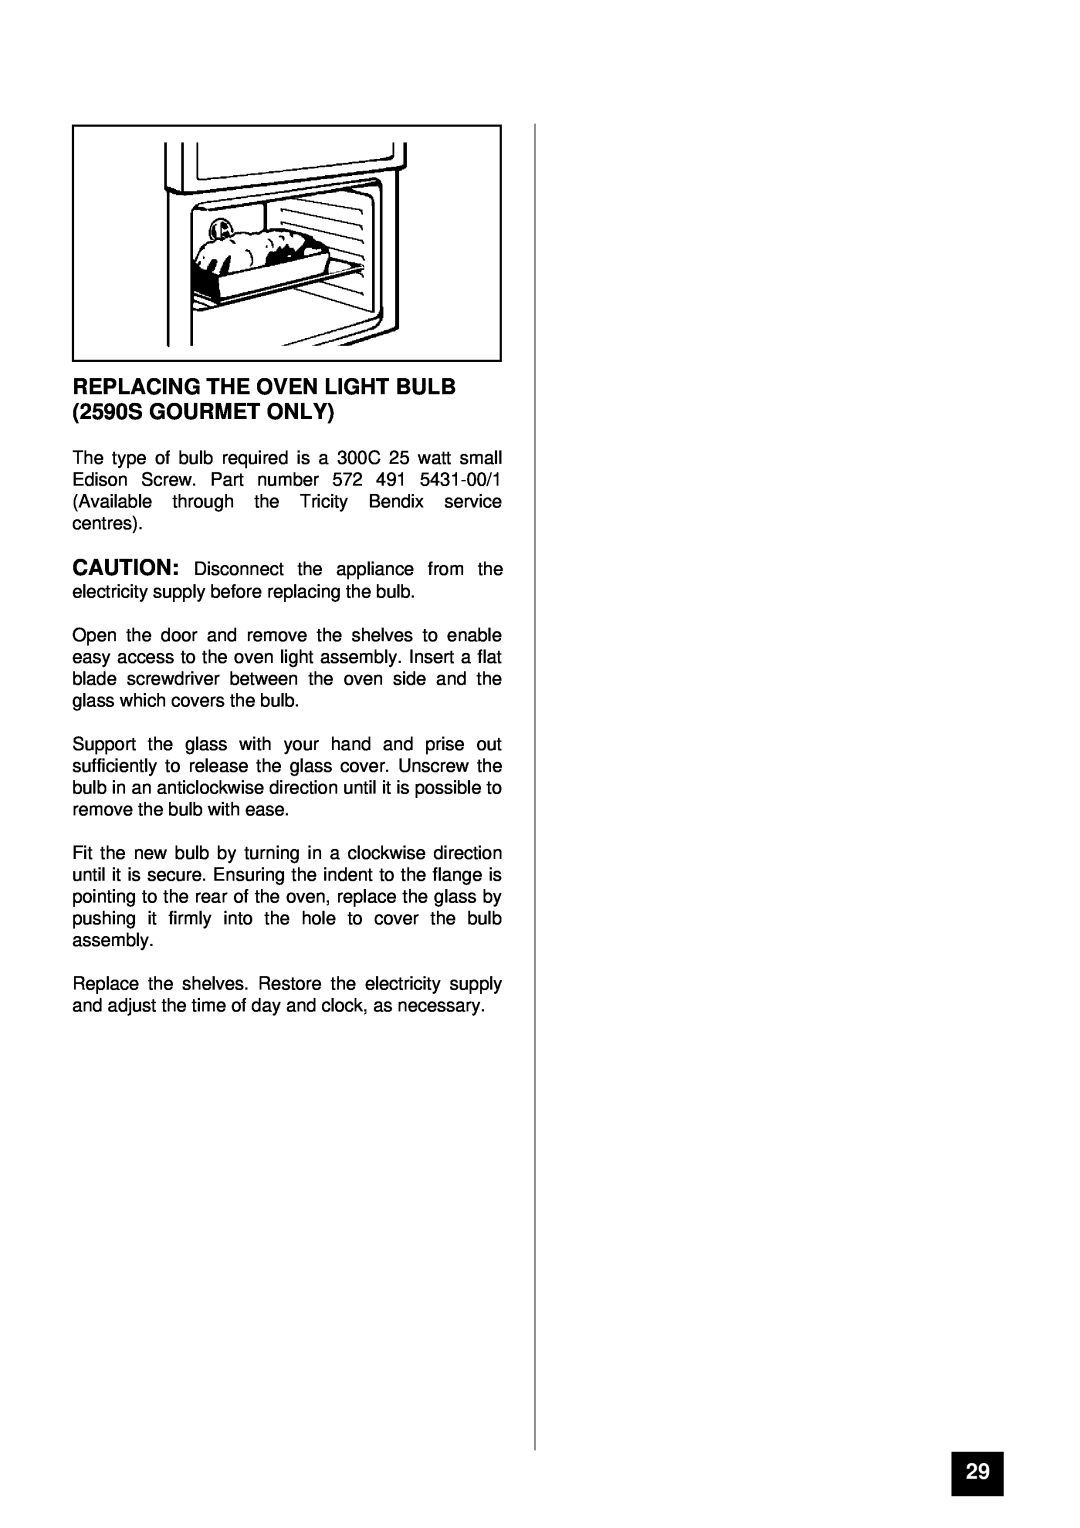 Tricity Bendix 2560S installation instructions REPLACING THE OVEN LIGHT BULB 2590S GOURMET ONLY 